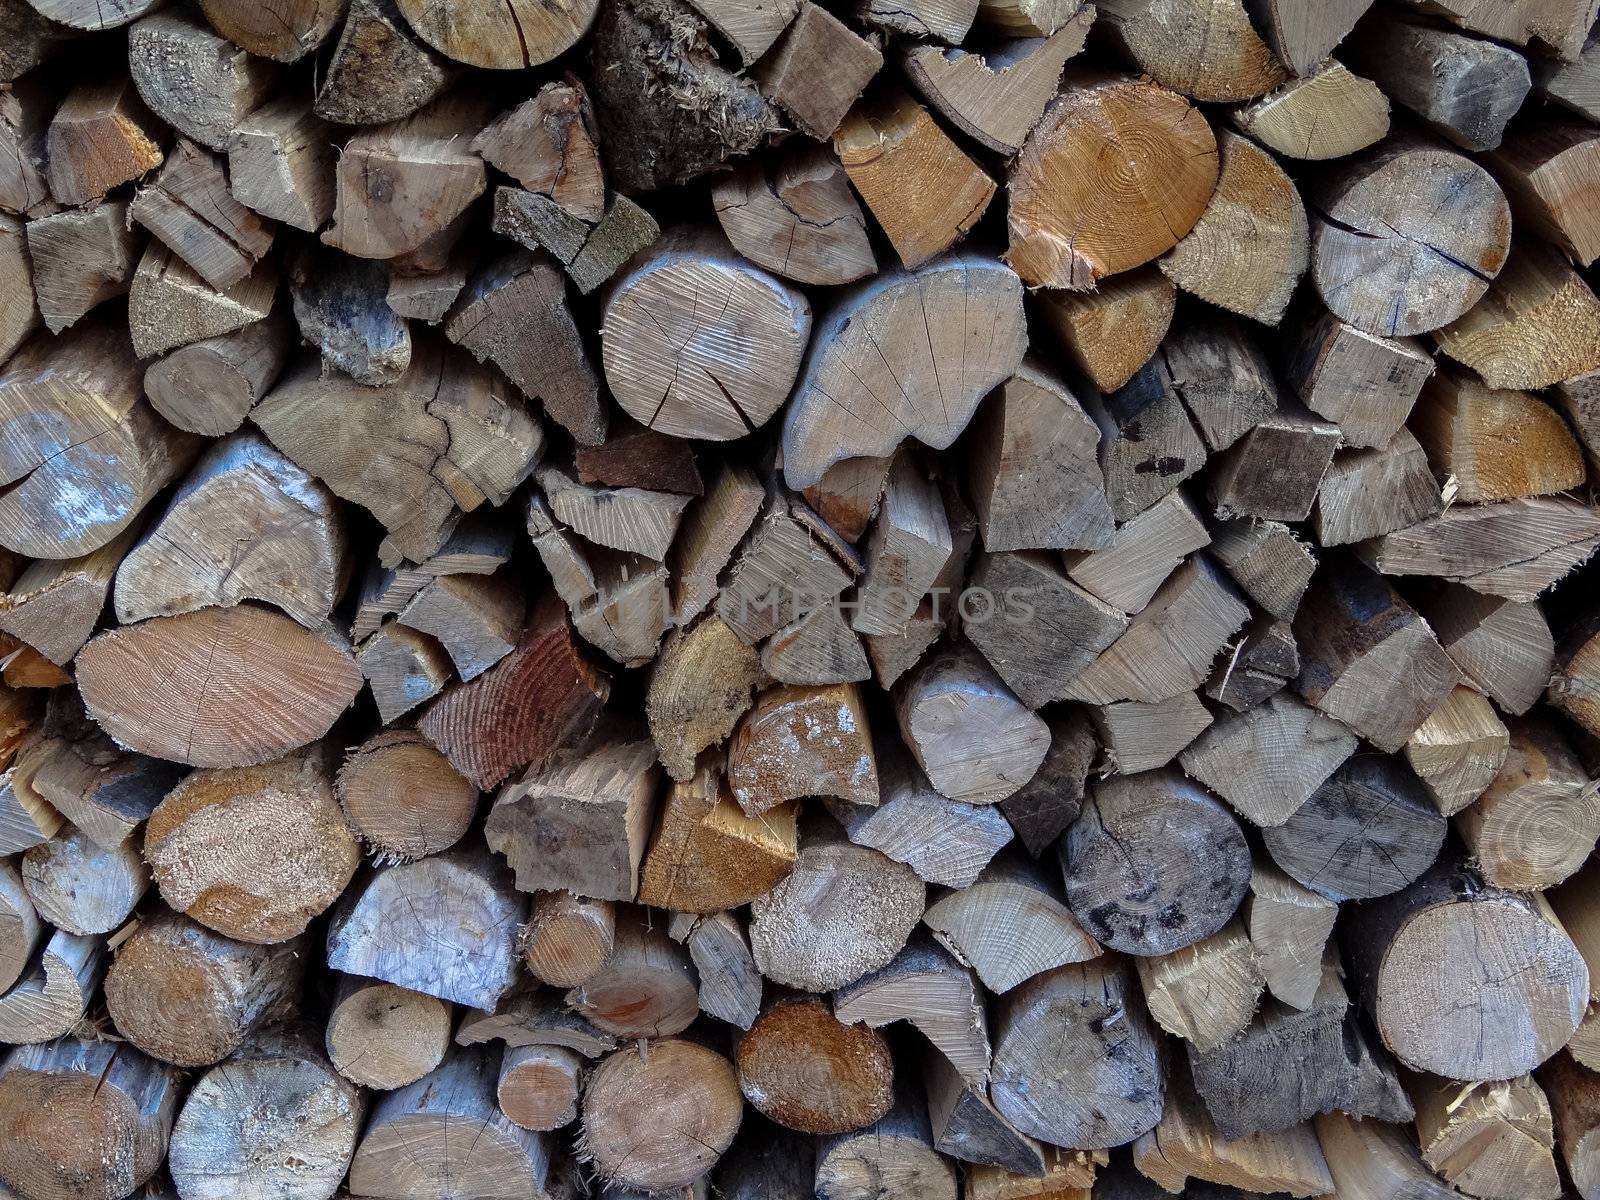 Wood pile by Mbatelier